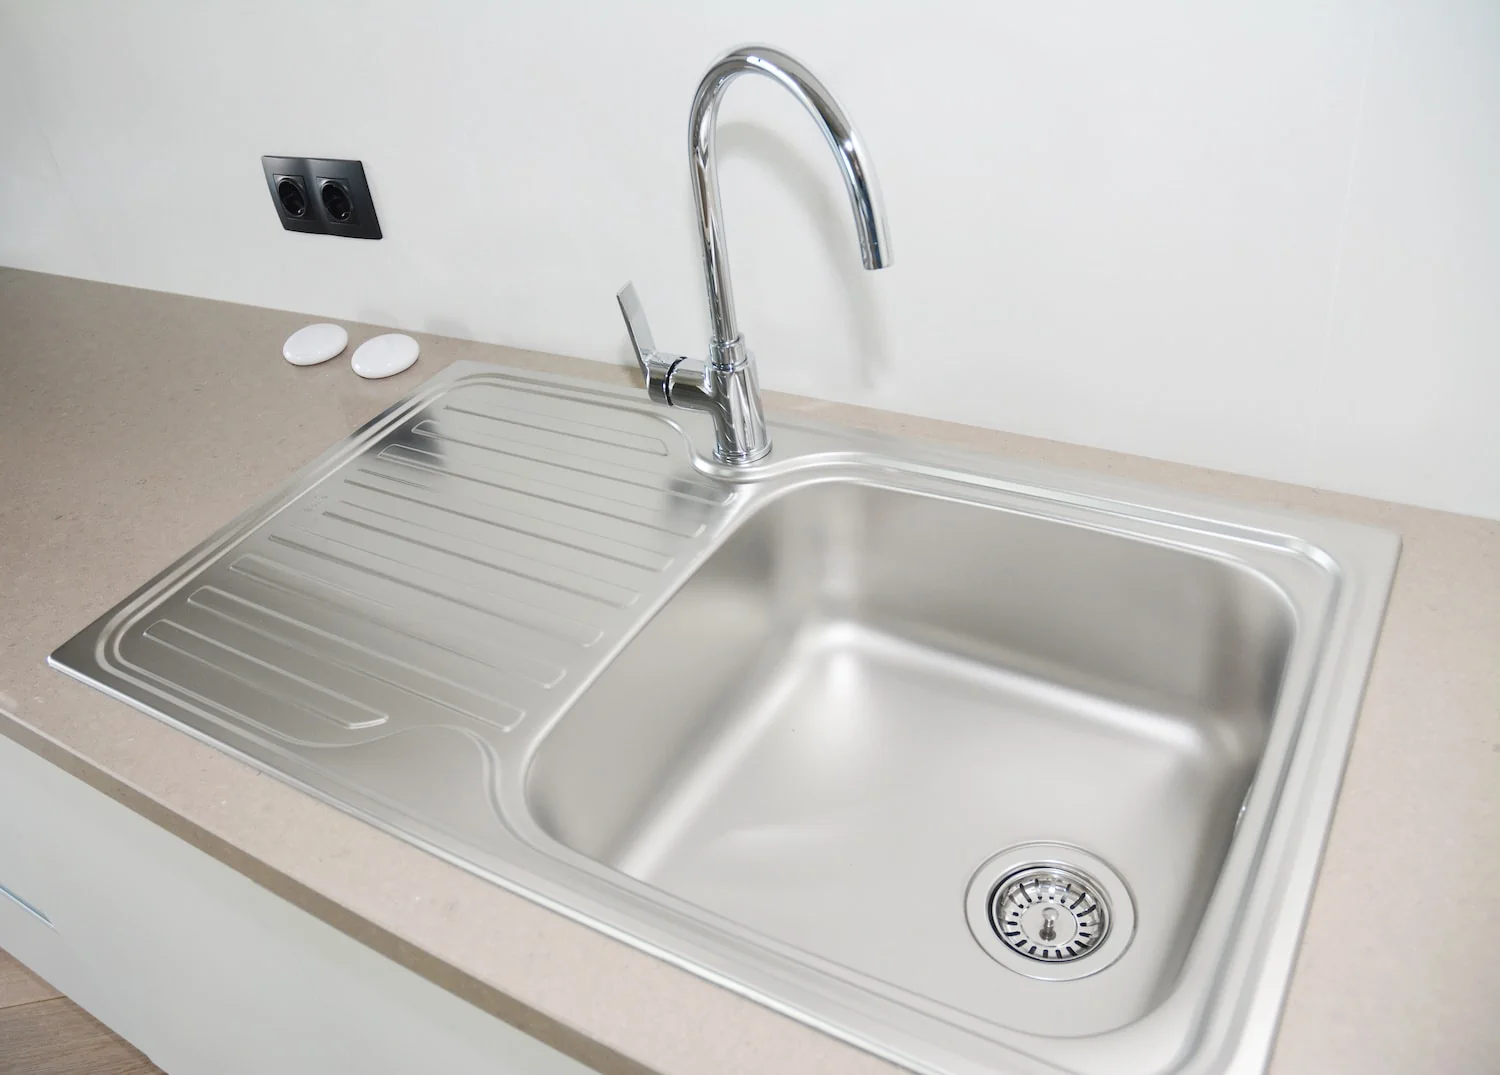 stainless steel drainboard sink is useful for prepping meals or drying dishes